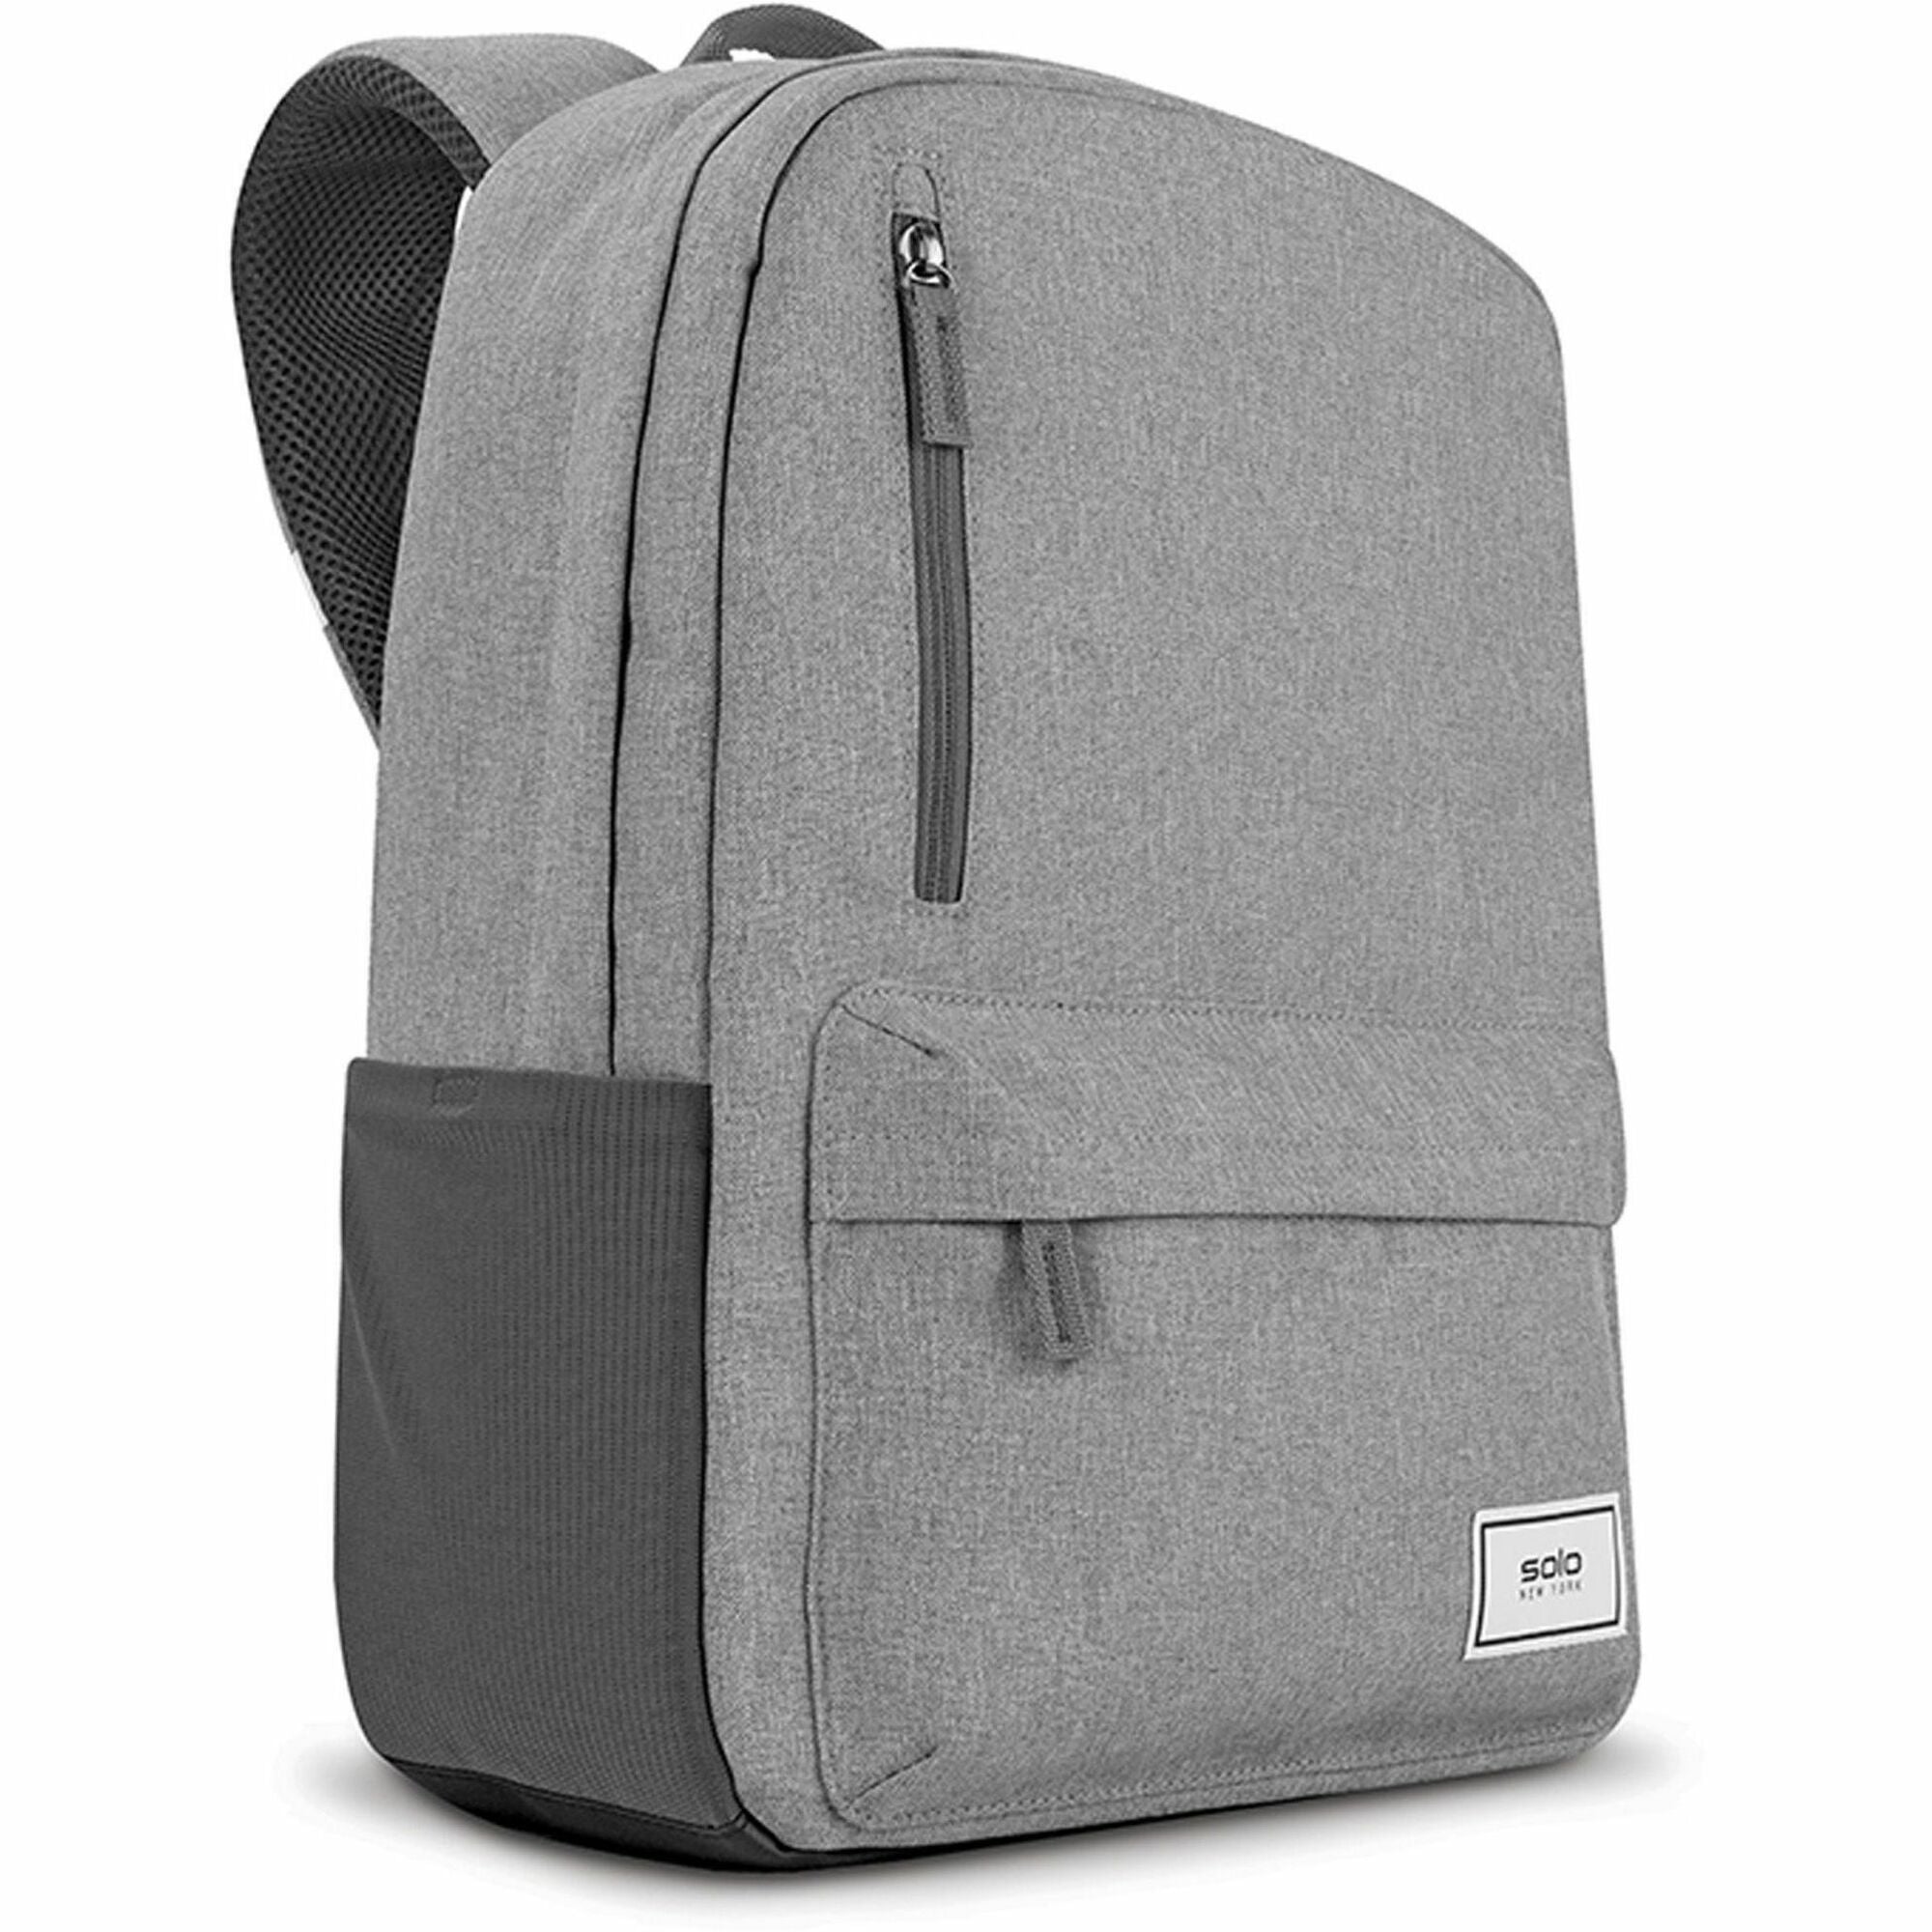 solo-recover-carrying-case-backpack-for-156-notebook-gray-bump-resistant-damage-resistant-shoulder-strap-luggage-strap-handle-148-height-x-113-width-x-7-depth-1-each_uslubn76110 - 1